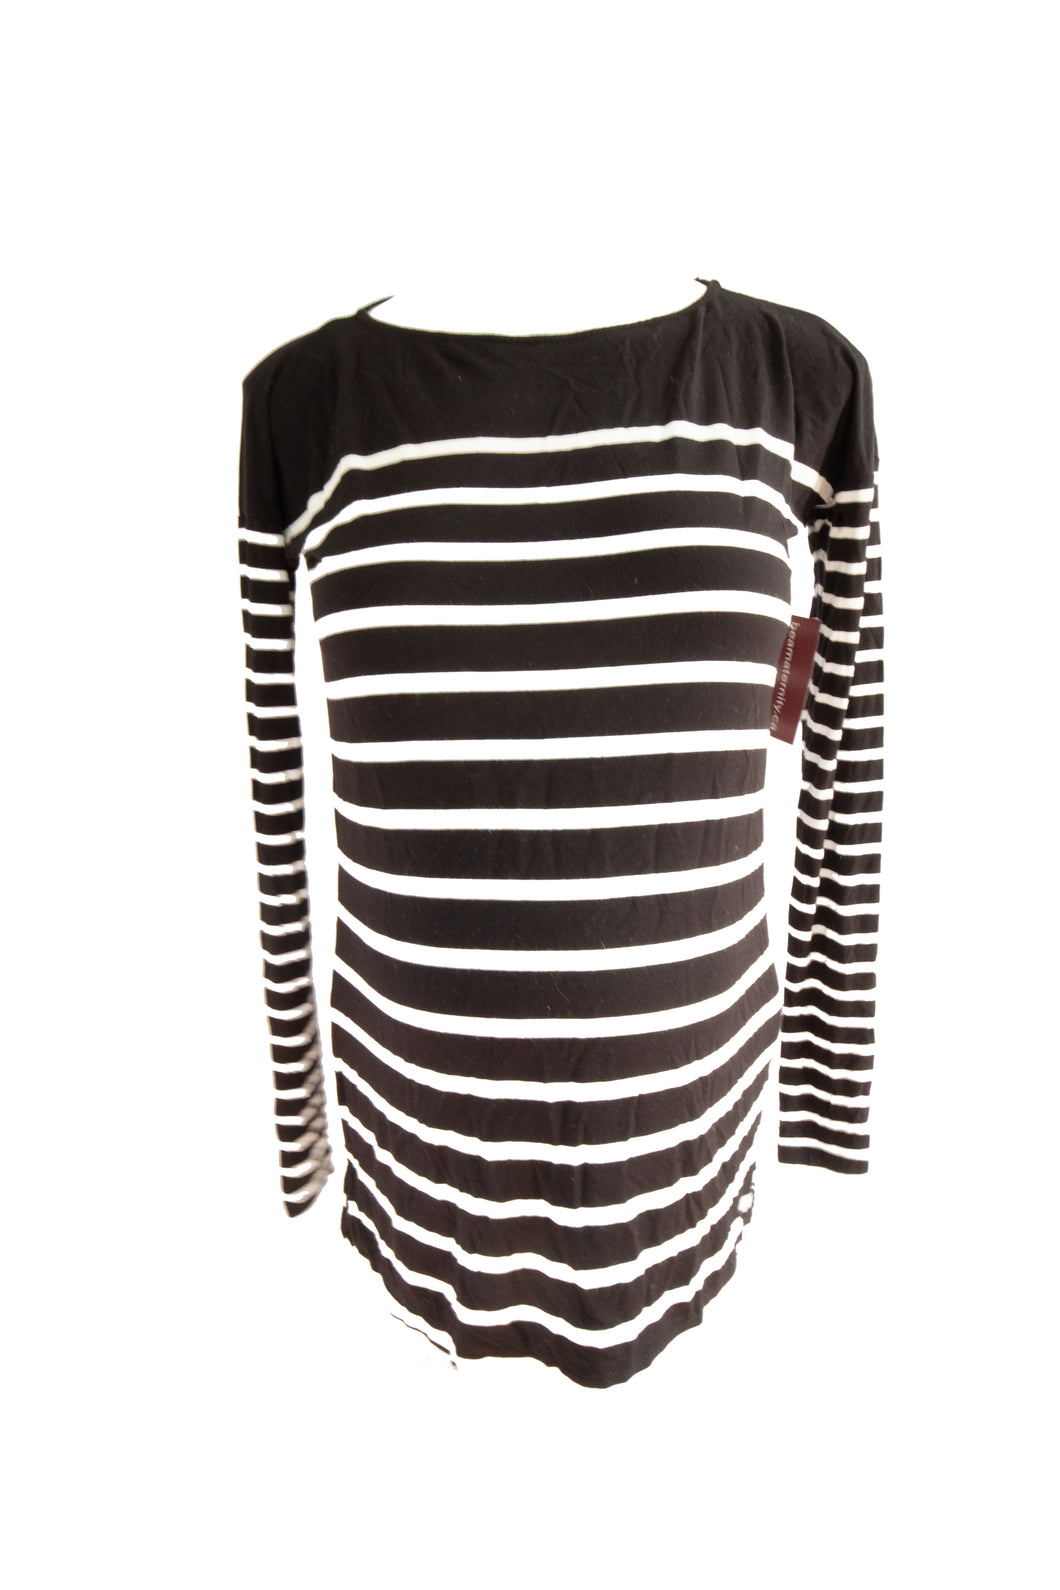 CLEARANCE XS A Pea in the Pod Maternity Long Sleeve Top in B&W stripe